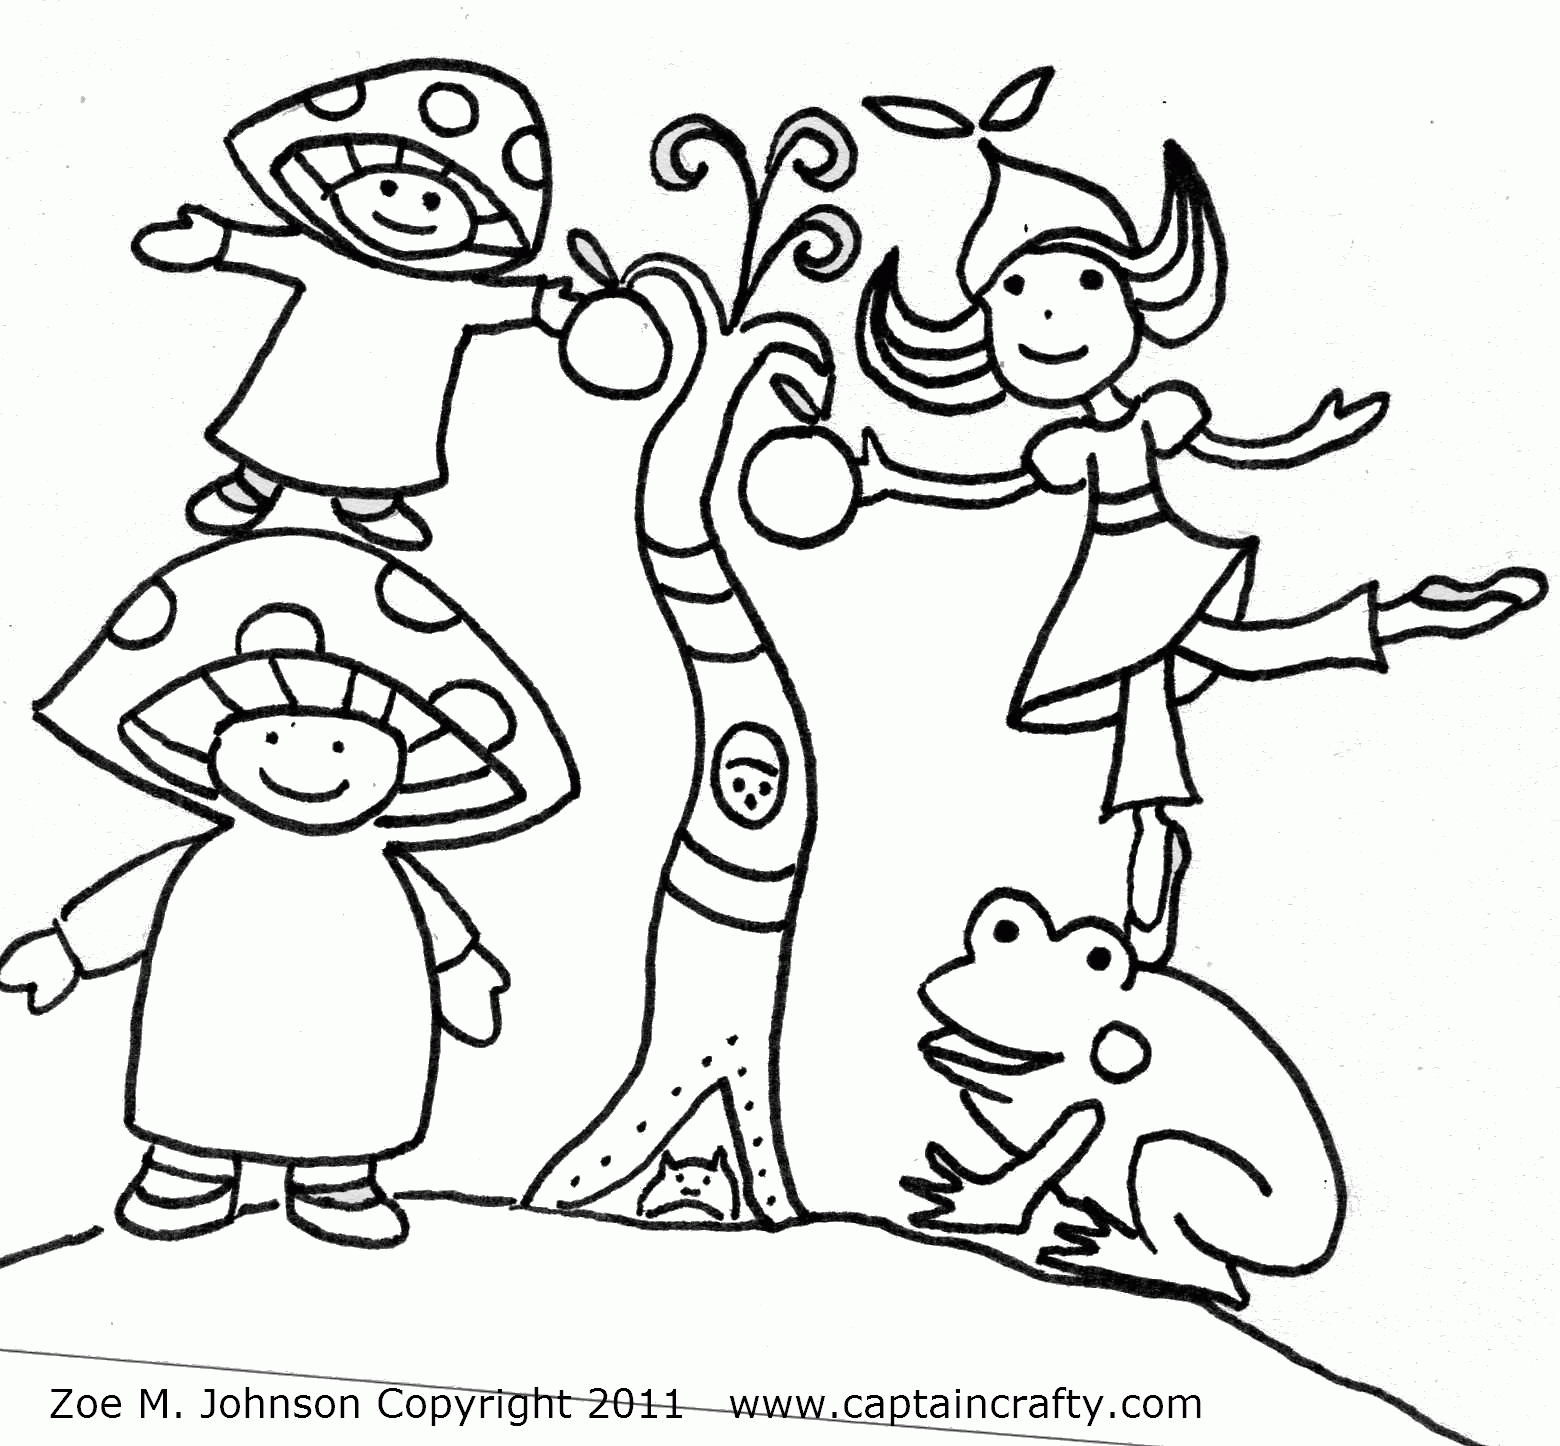 Coloring Pages Friendship - High Quality Coloring Pages